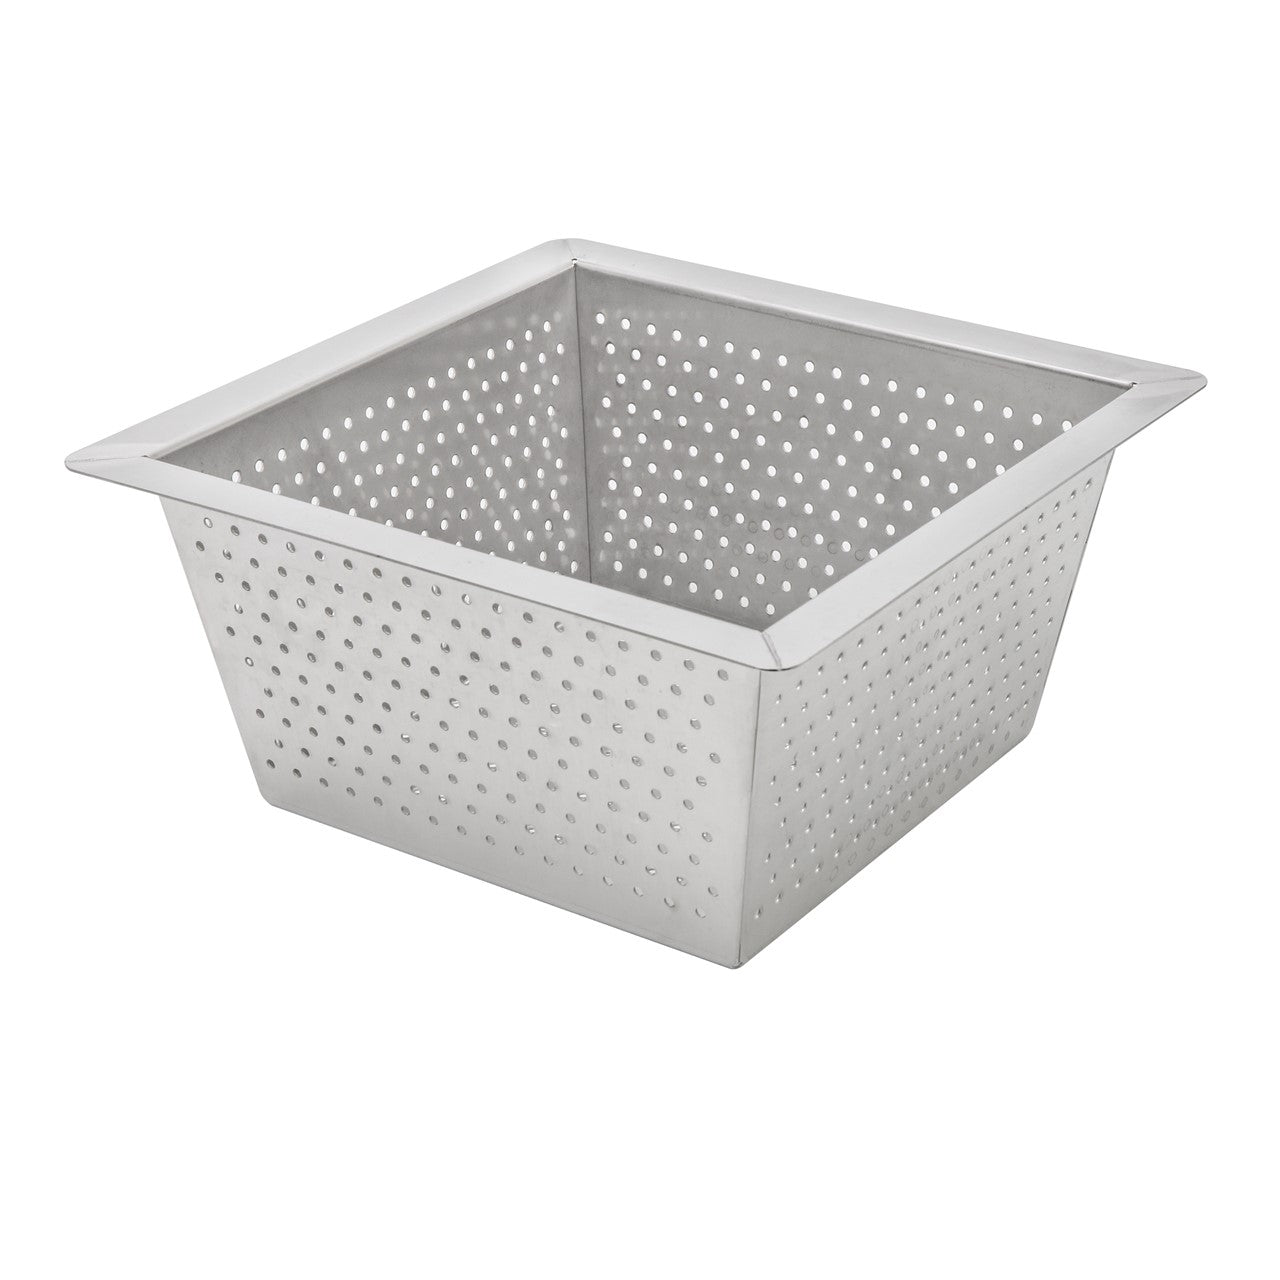 Leyso Stainless Steel Floor Sink Top Hang Basket Strainer Sink Drain Cover 10” x 10” x 4-3/4” for Kitchen, Restaurant, Bar, Buffet (4-3/4H SS)